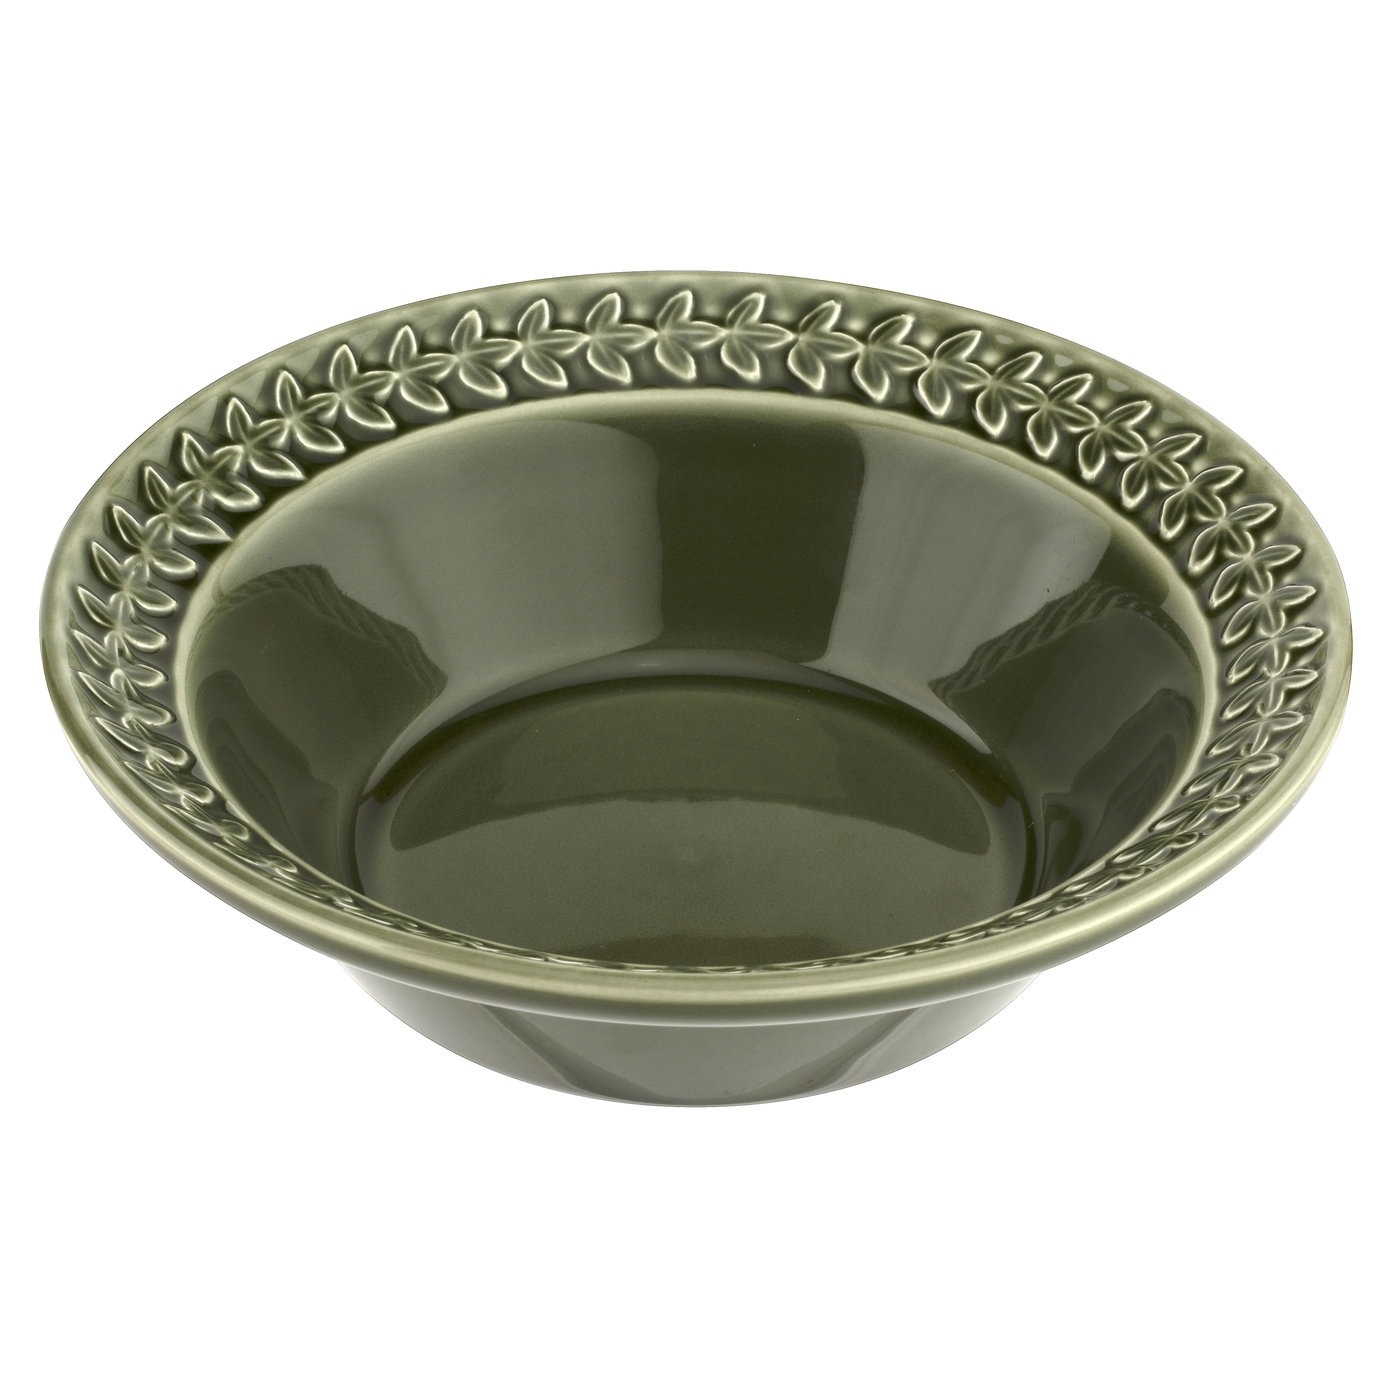 Botanic Garden Harmony Cereal Bowl, Forest Green image number null